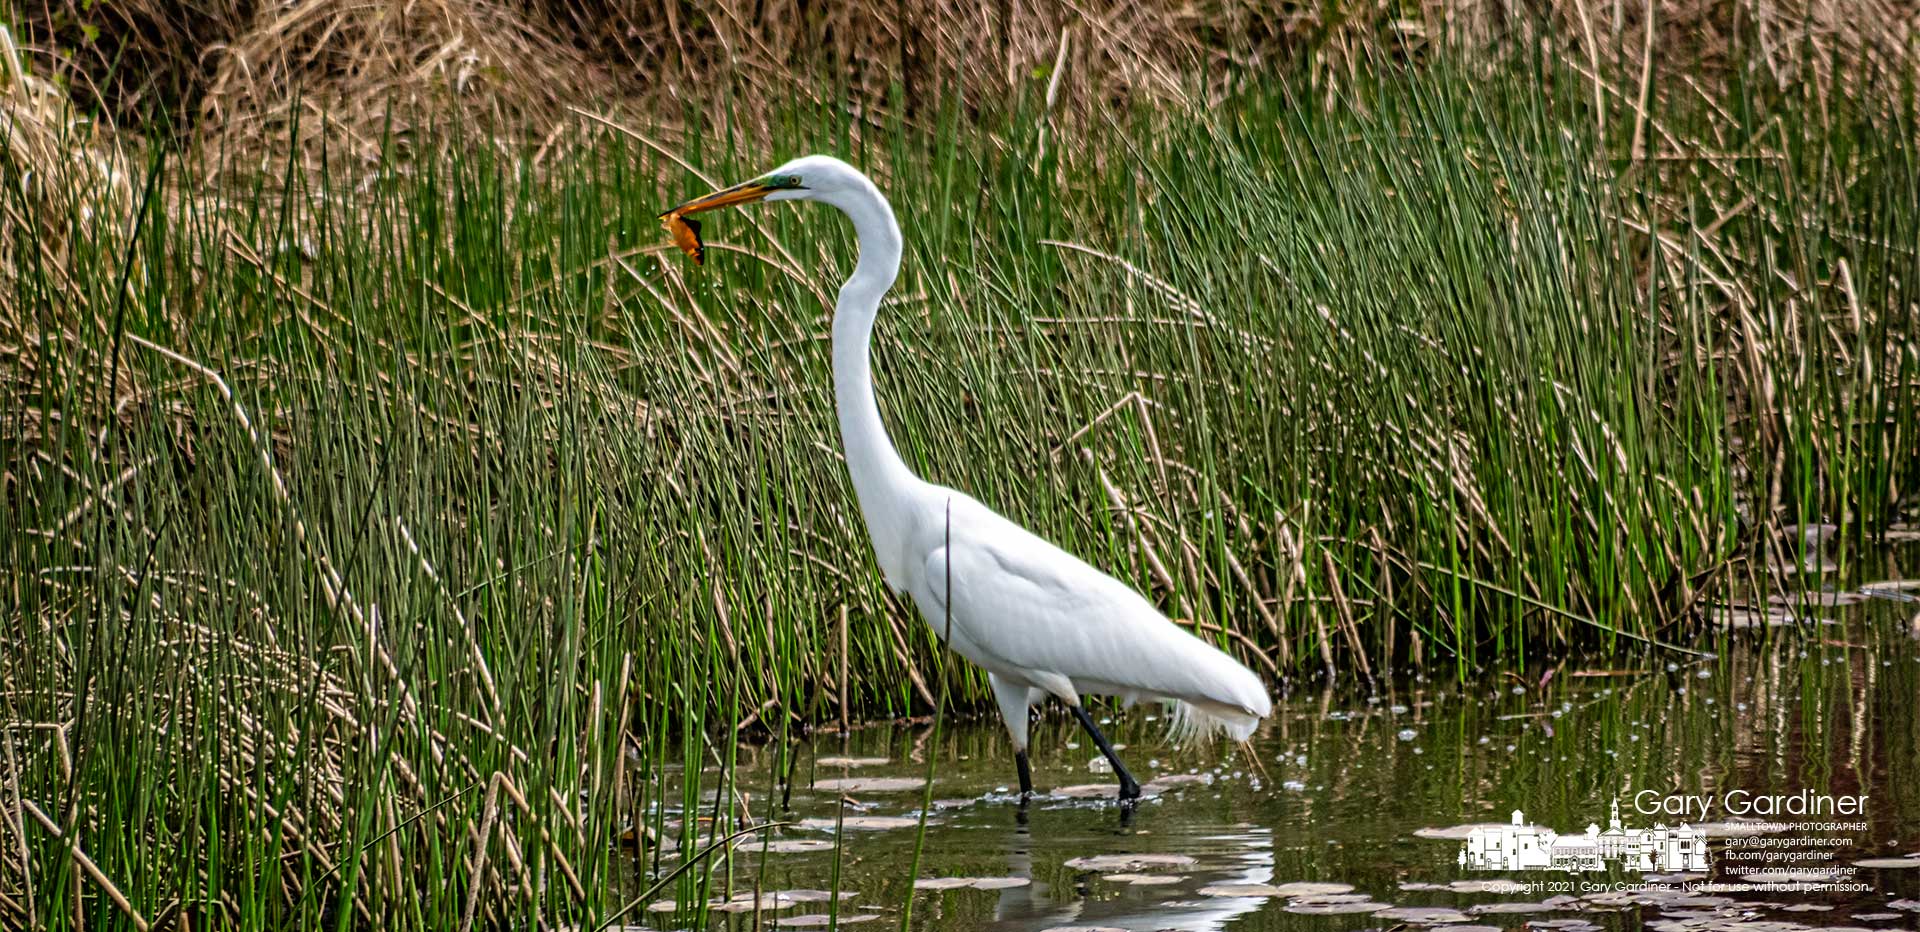 A snow egret pulls a family's discarded goldfish from the waters at the Highlands Wetlands. My Final Photo for April 19, 2021.